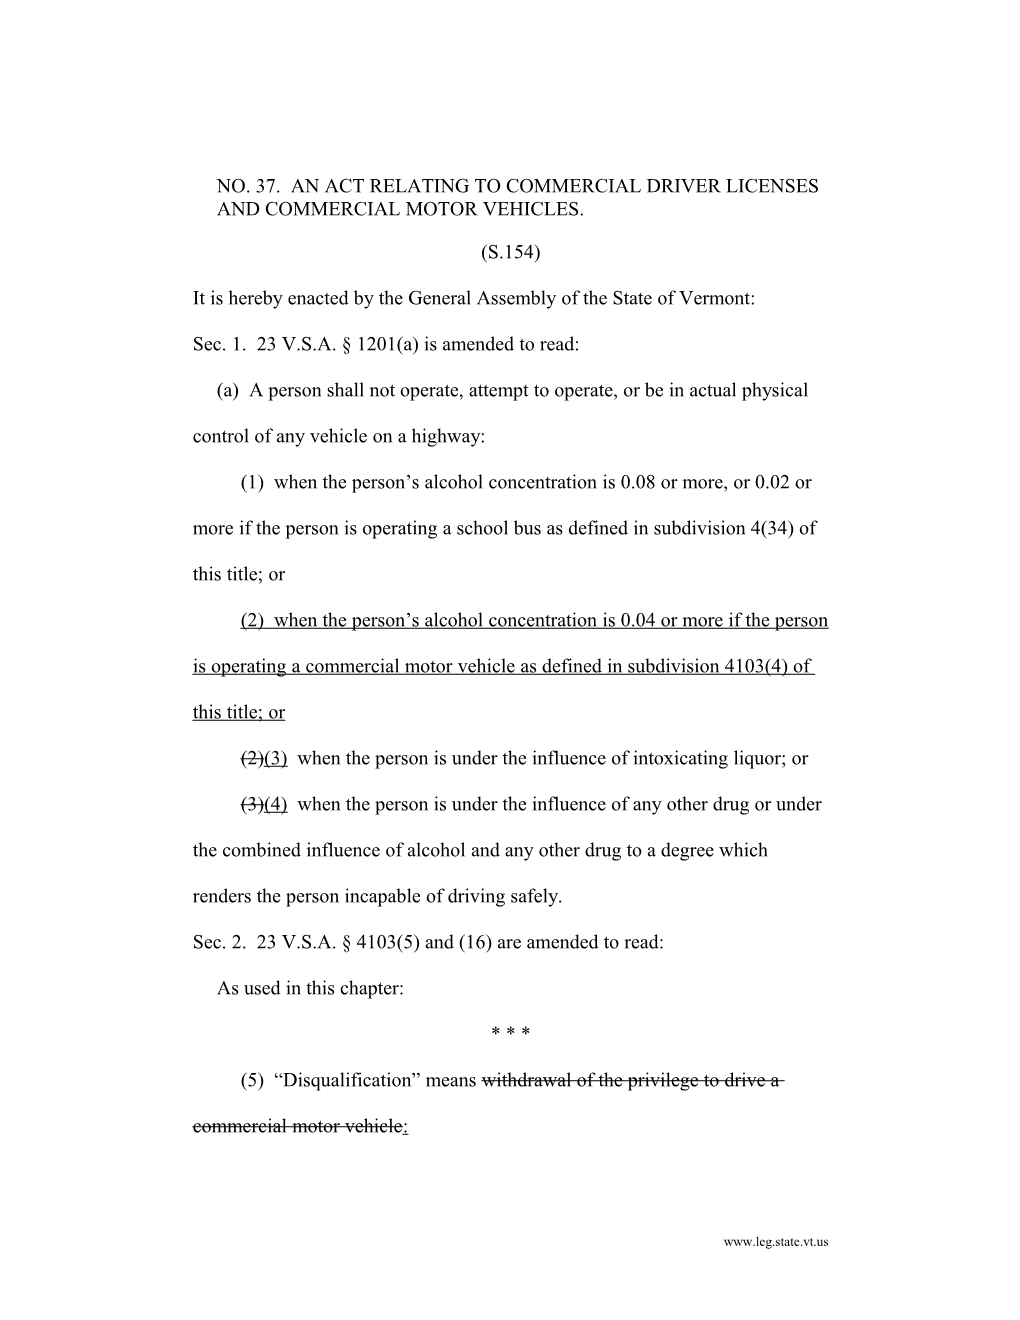 No. 37. an Act Relating to Commercial Driver Licenses and Commercial Motor Vehicles